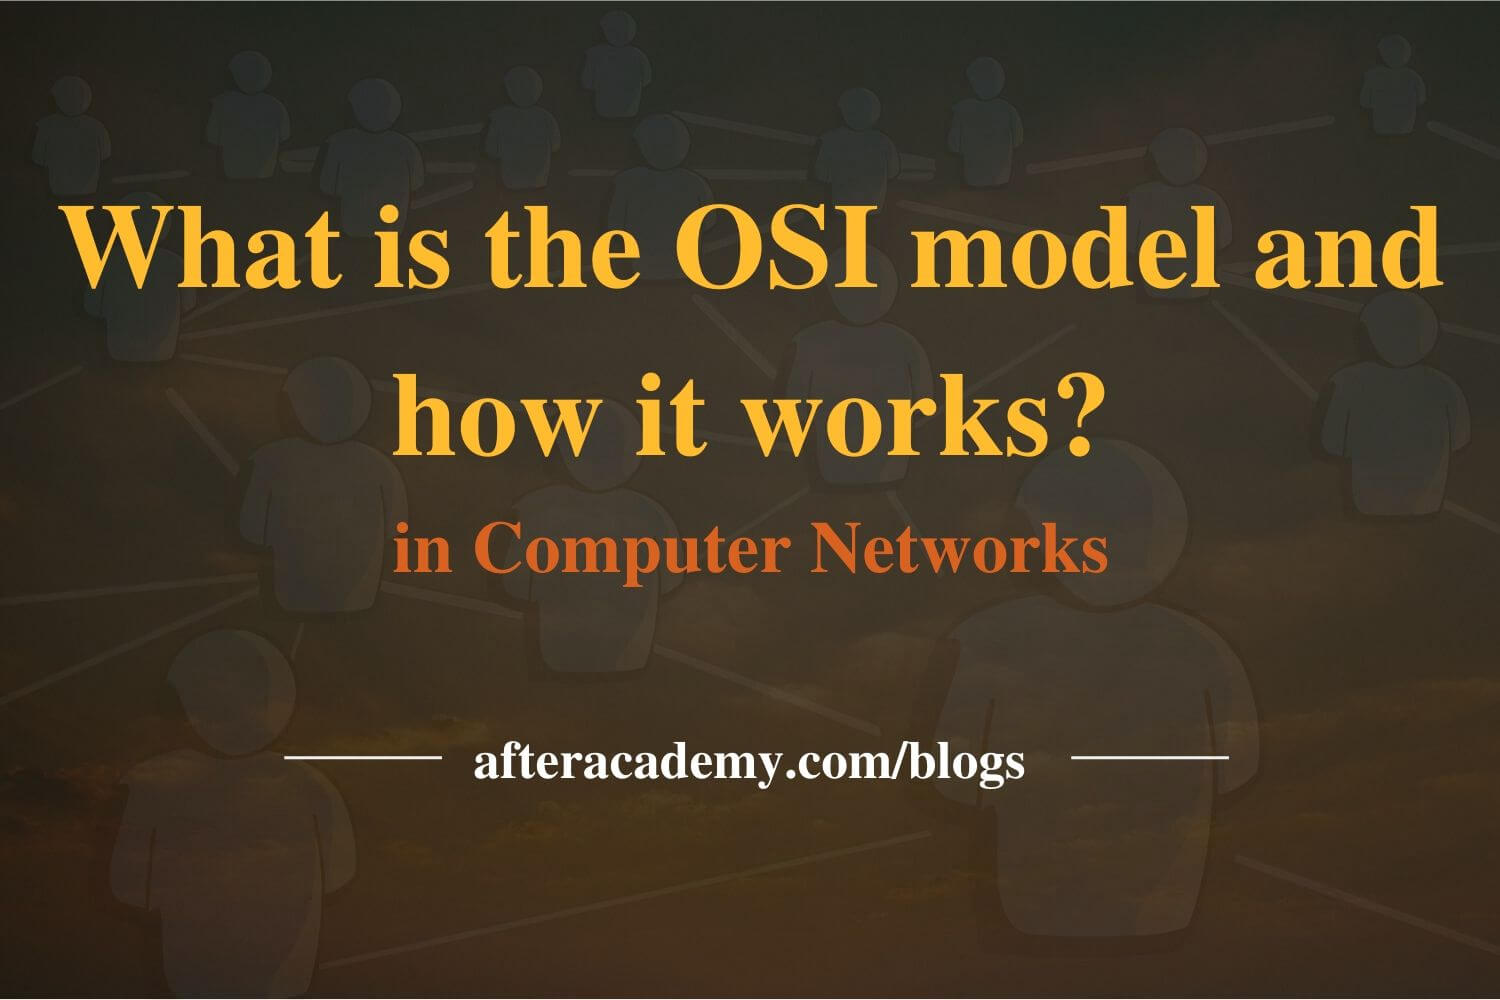 What is the OSI model and how it works?